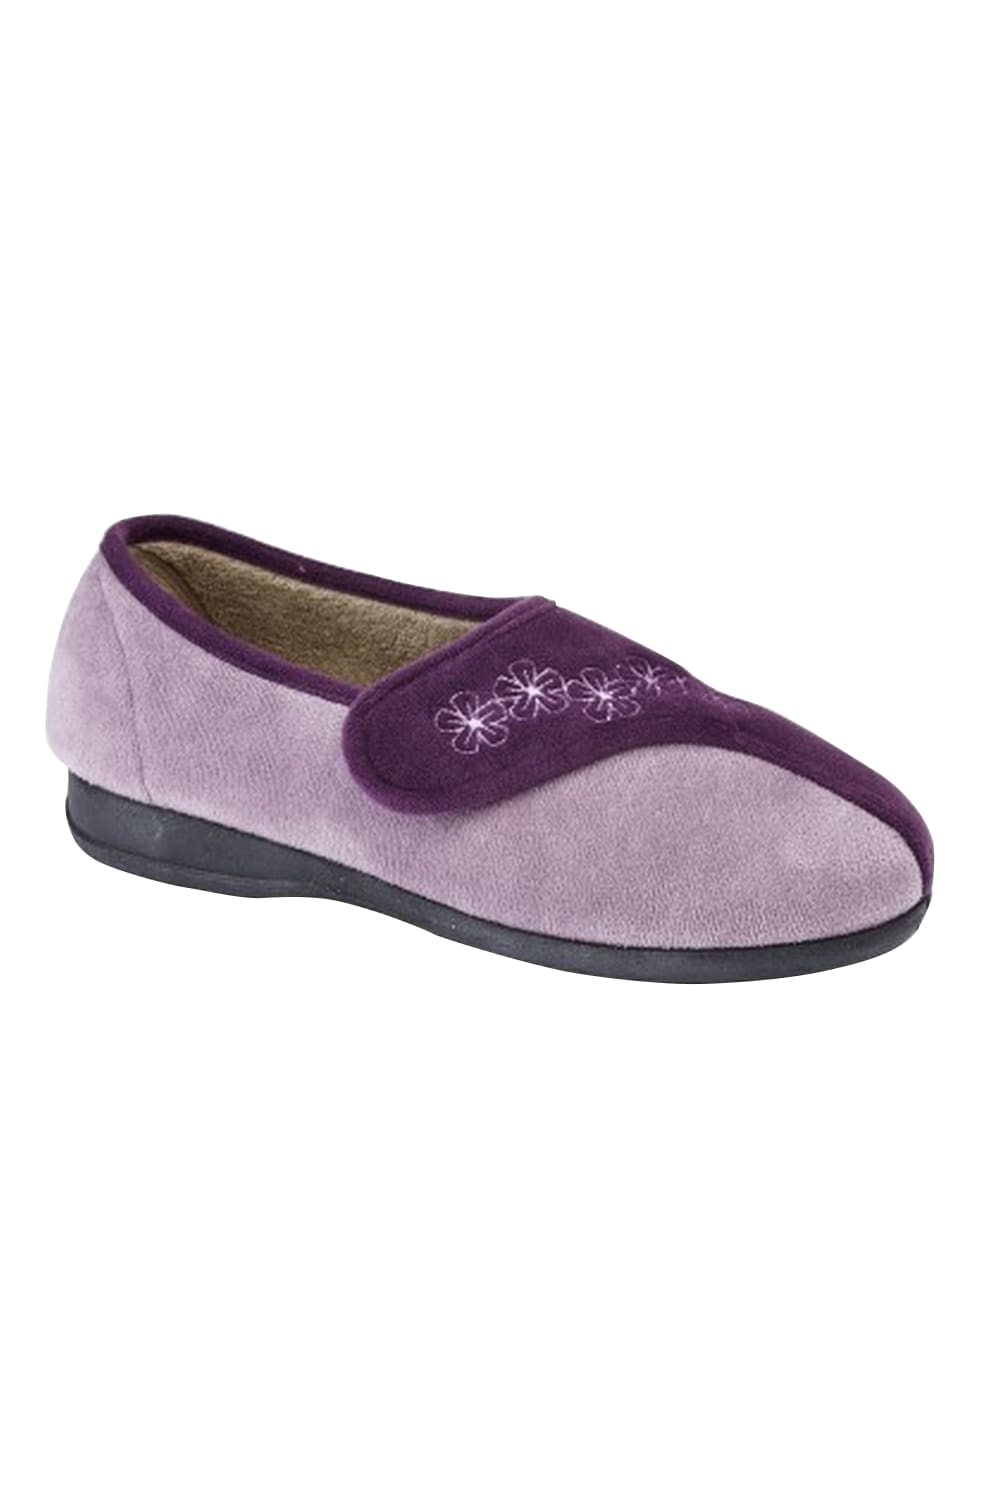 Womens/Ladies Gemma Touch Fastening Embroidered Slippers - Purple/Lilac